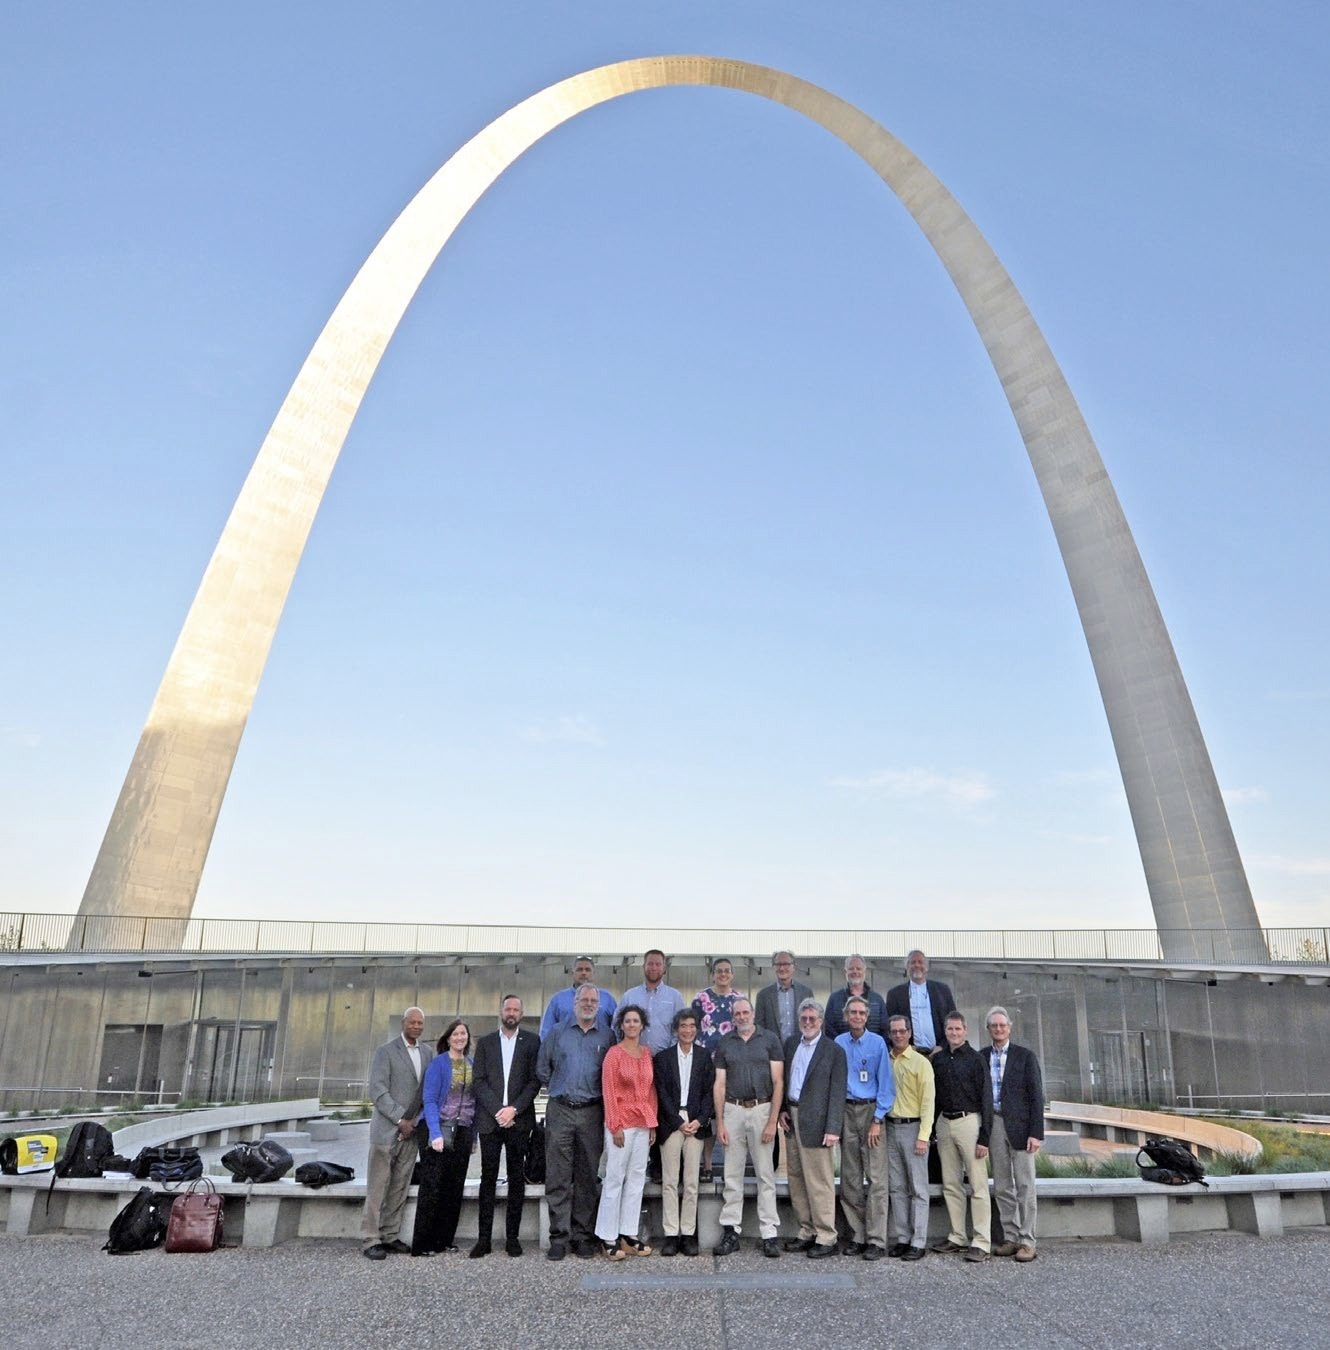 Attendees at the 2018 Gateway Arch Expert Workshop pose in front of the Arch.